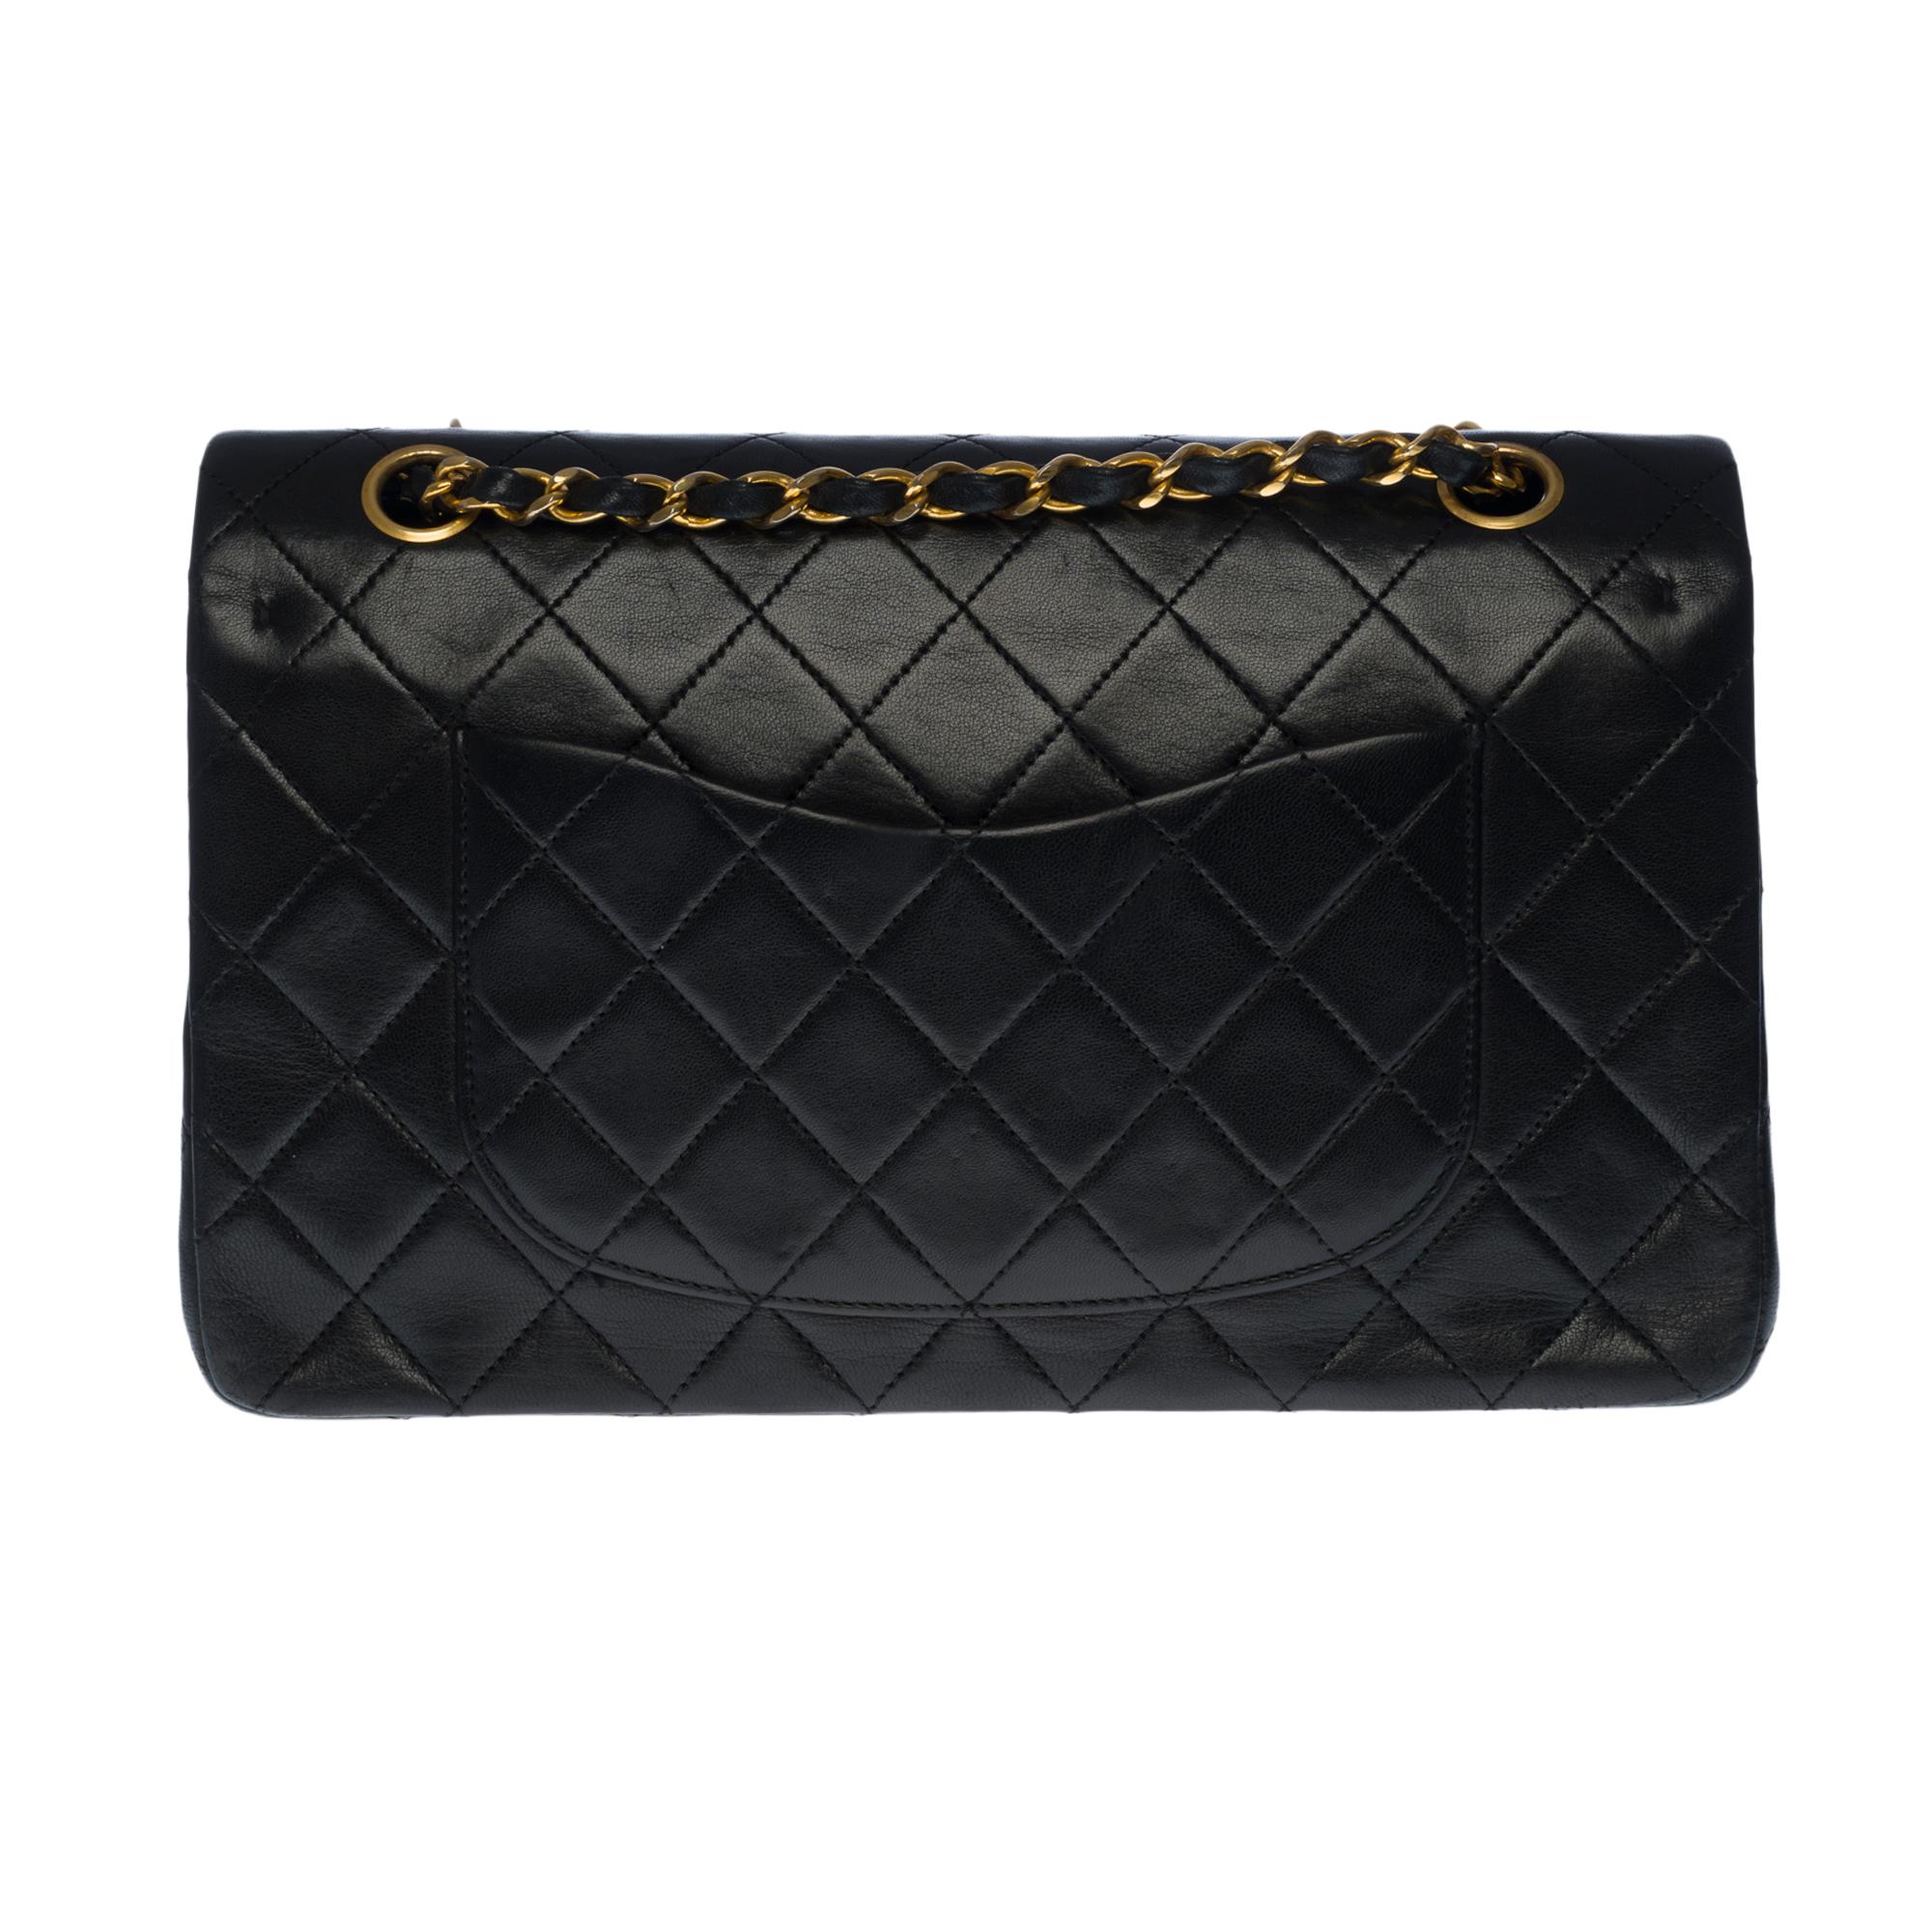 Beautiful Chanel Timeless Medium 25cm handbag with double flap in black quilted lambskin leather, gold-tone metal hardware, a gold-tone metal chain handle interwoven with black leather allowing a hand or shoulder support.

Closure with gold metal